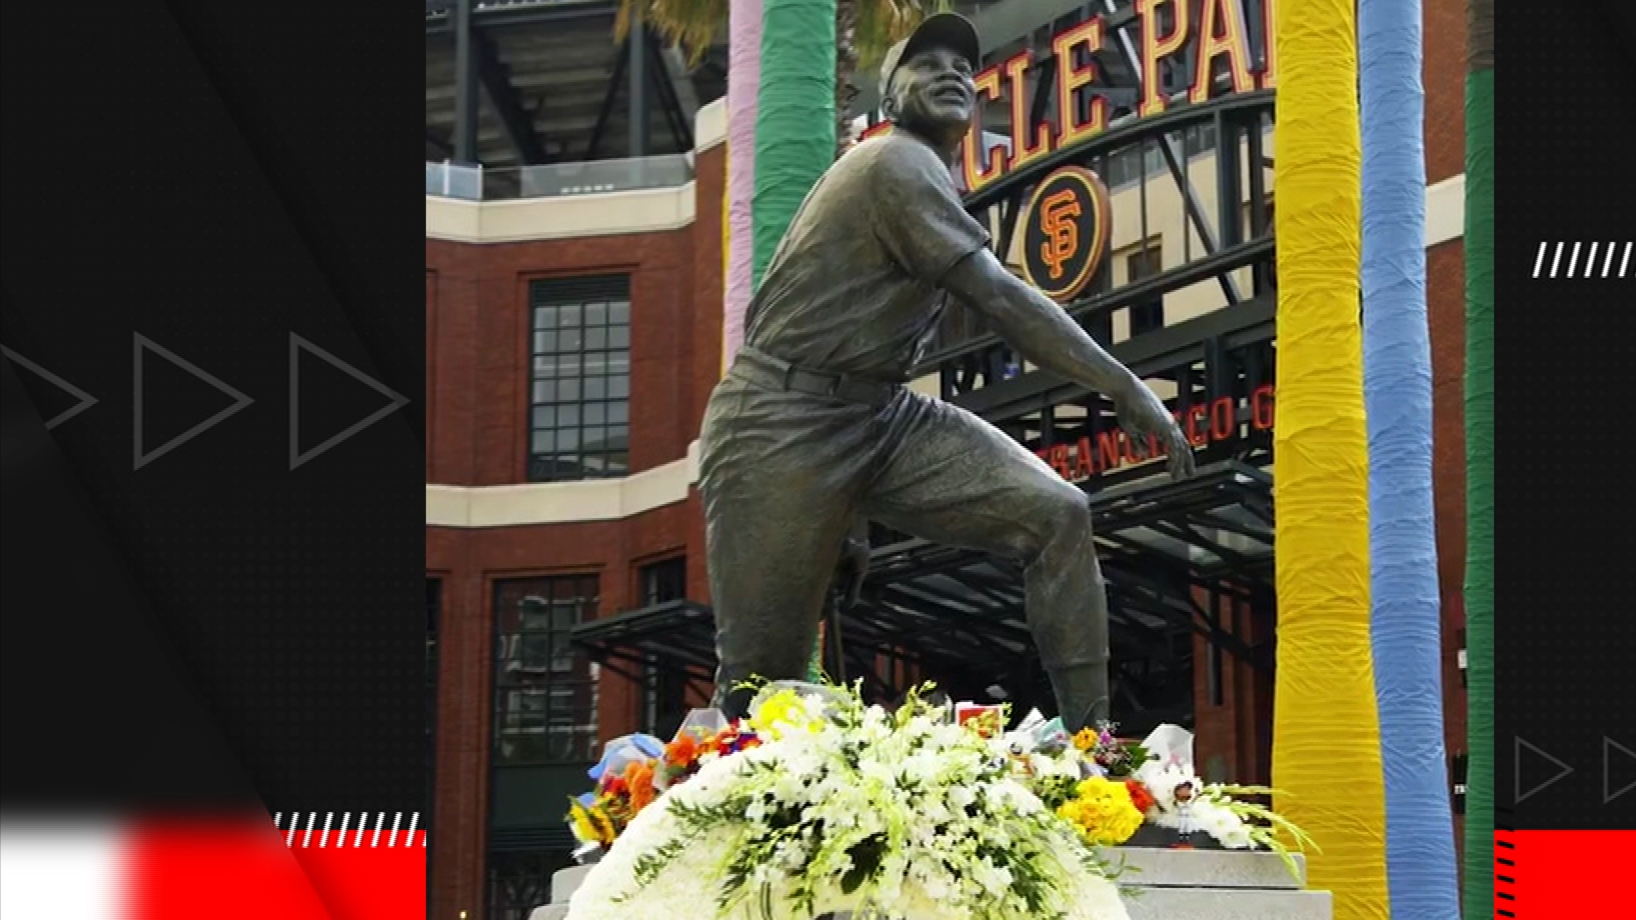 Giants fans honor Willie Mays at his Oracle Park statue